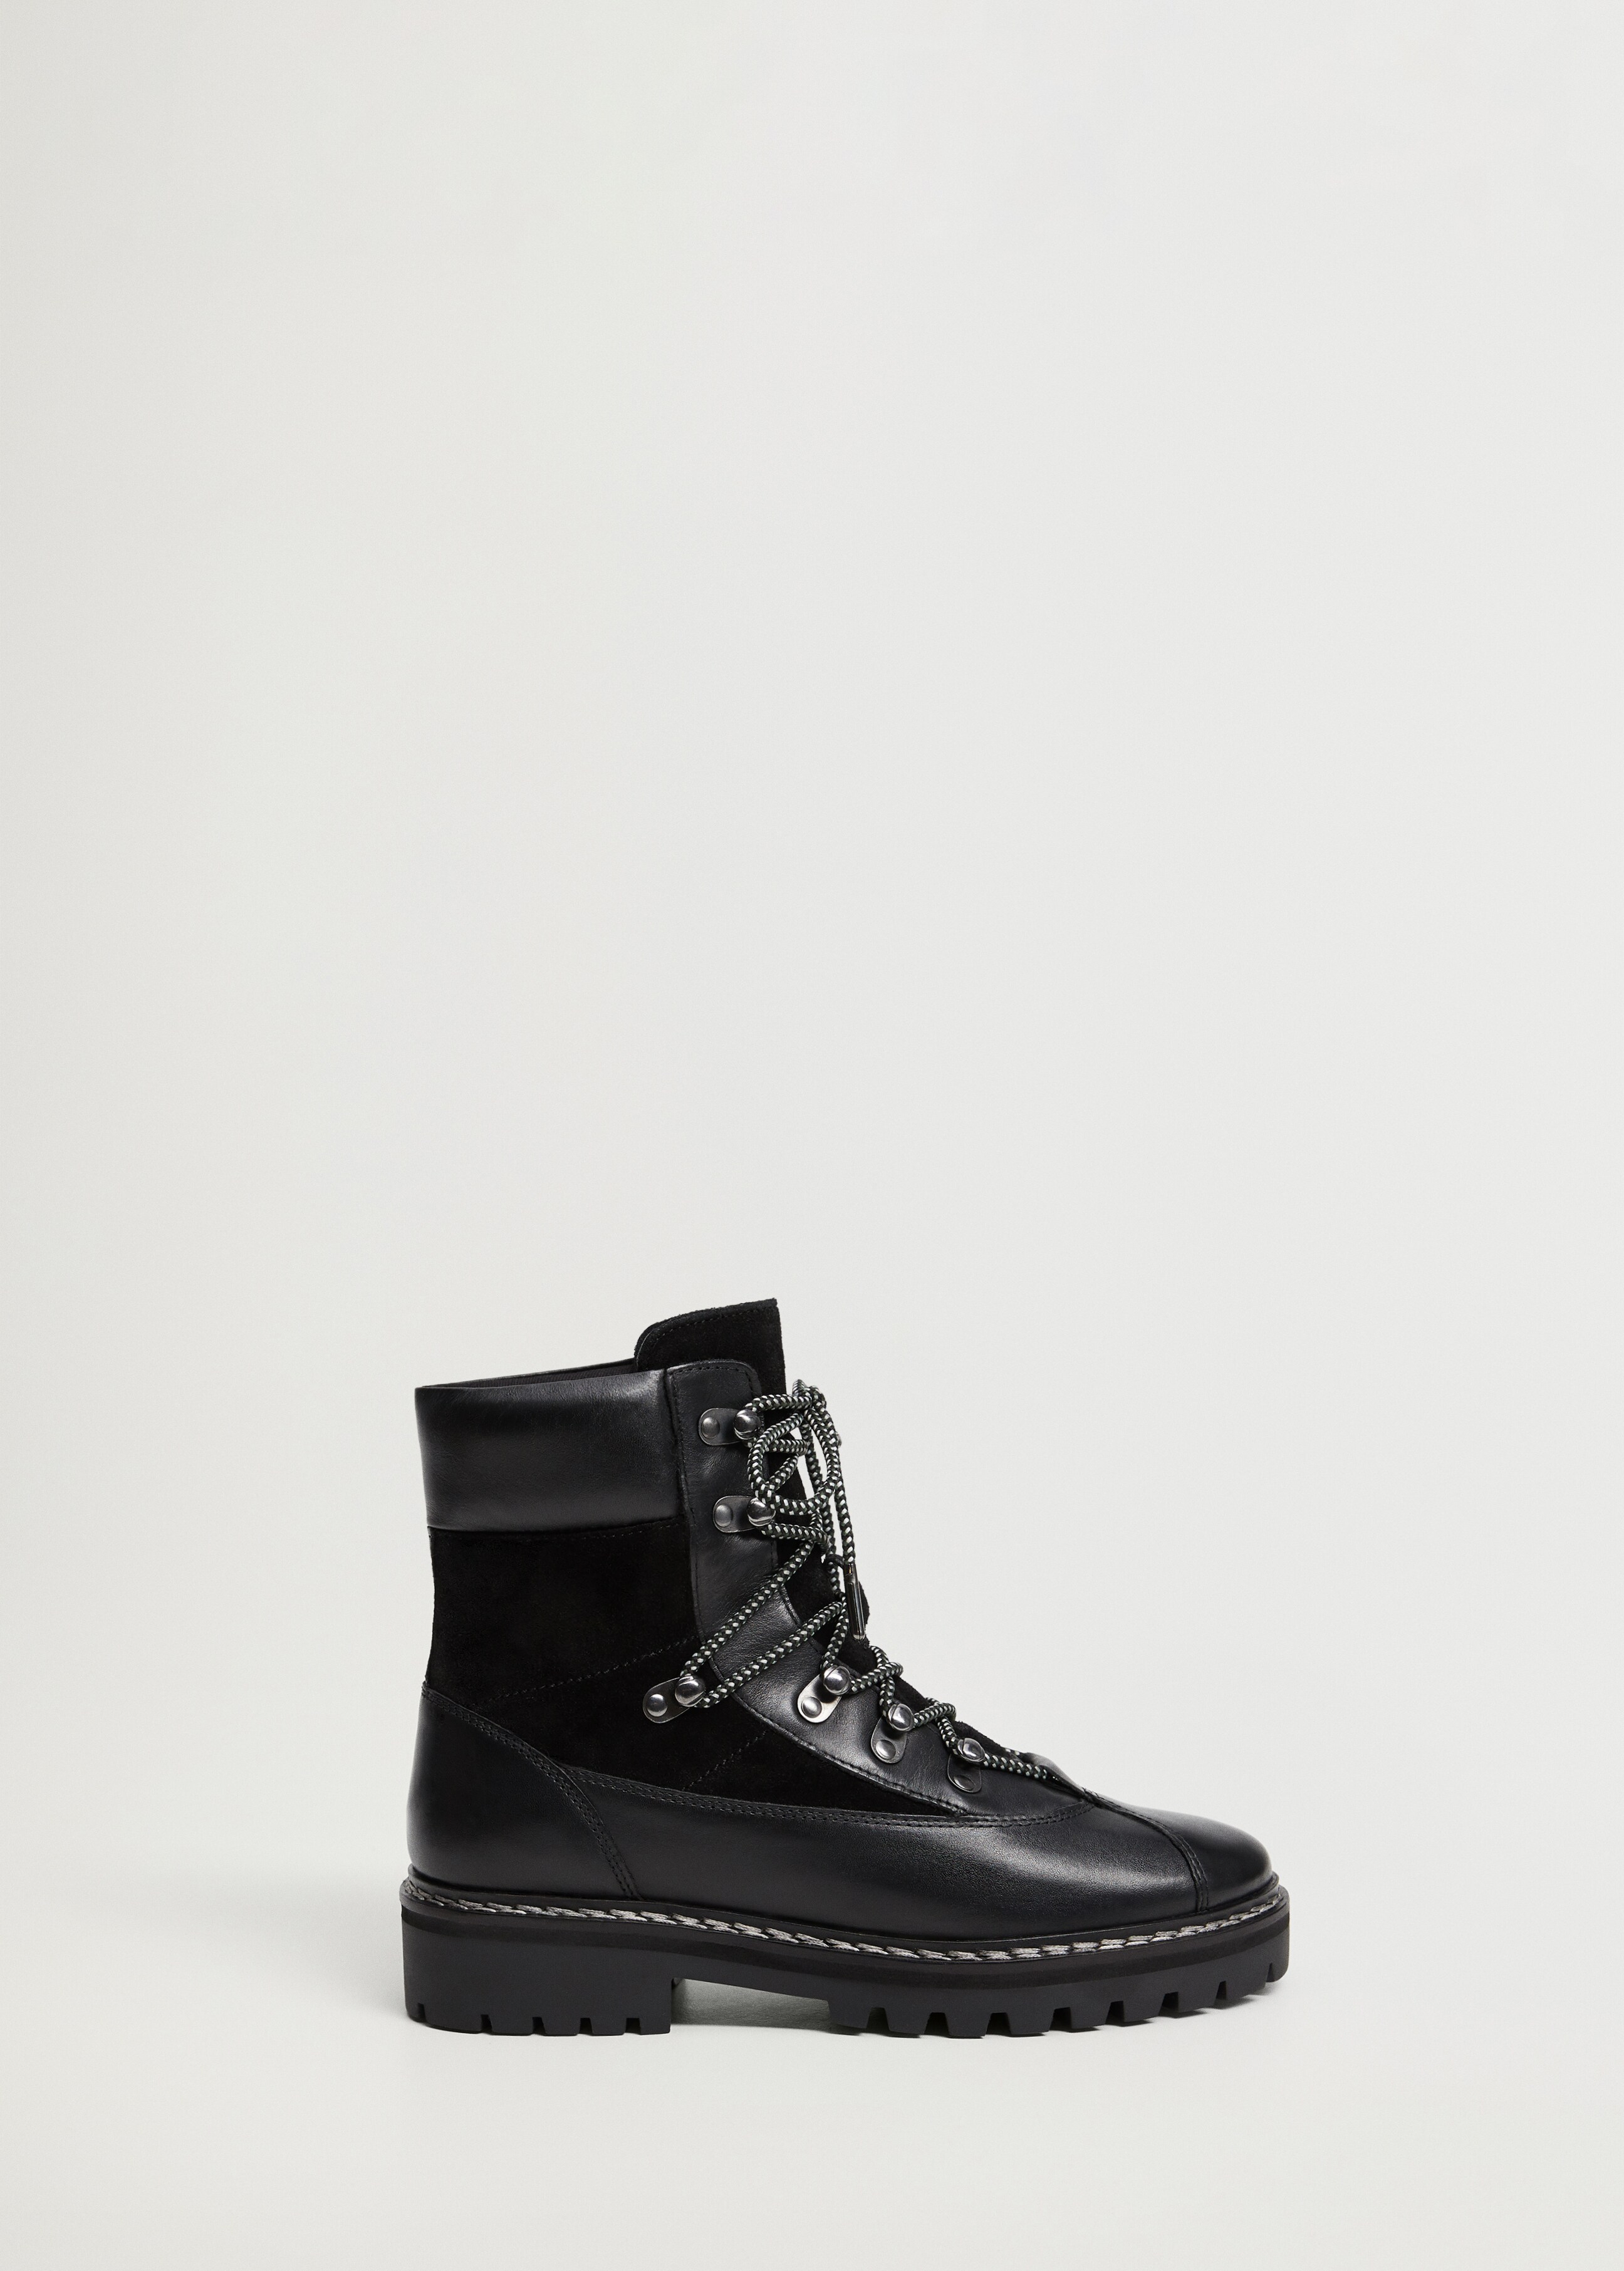 Contrast lace-up leather boots - Article without model